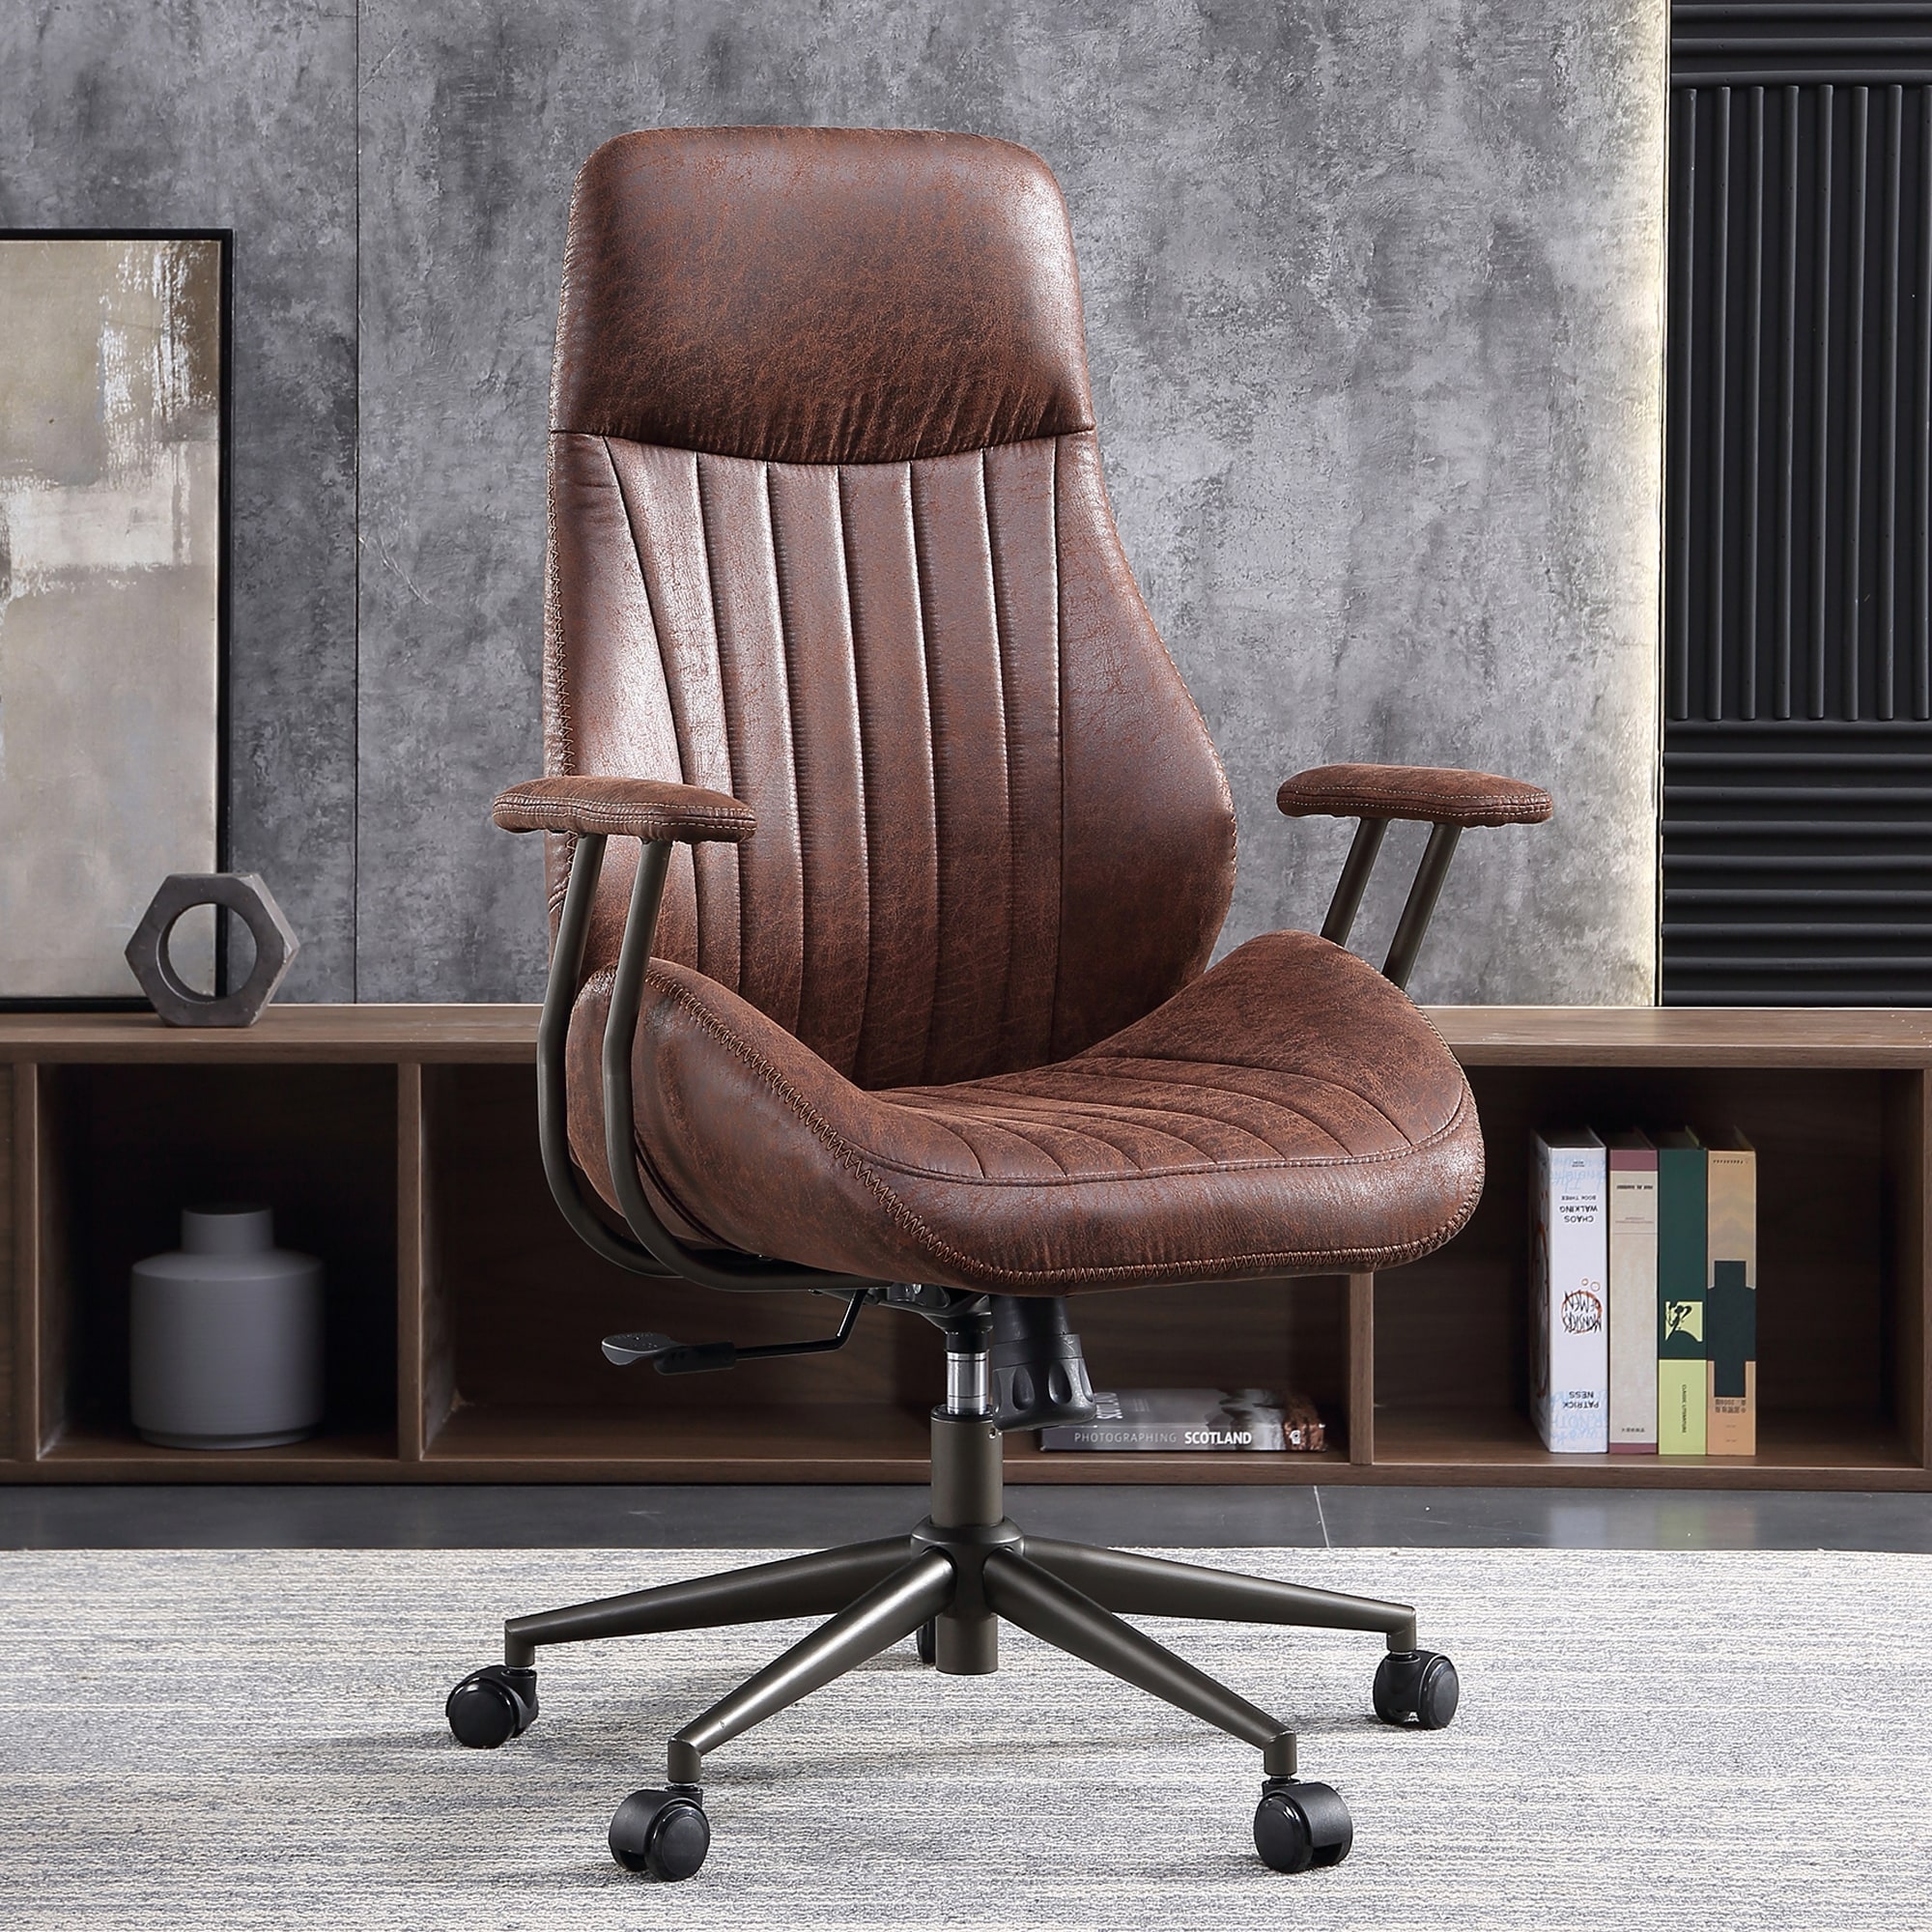 https://ak1.ostkcdn.com/images/products/is/images/direct/1e32d806eec16920998df3c3e2a1b9dd18b90fcf/OVIOS-Suede-Fabric-Ergonomic-Office-Chair-High-Back-Lumbar-Support.jpg